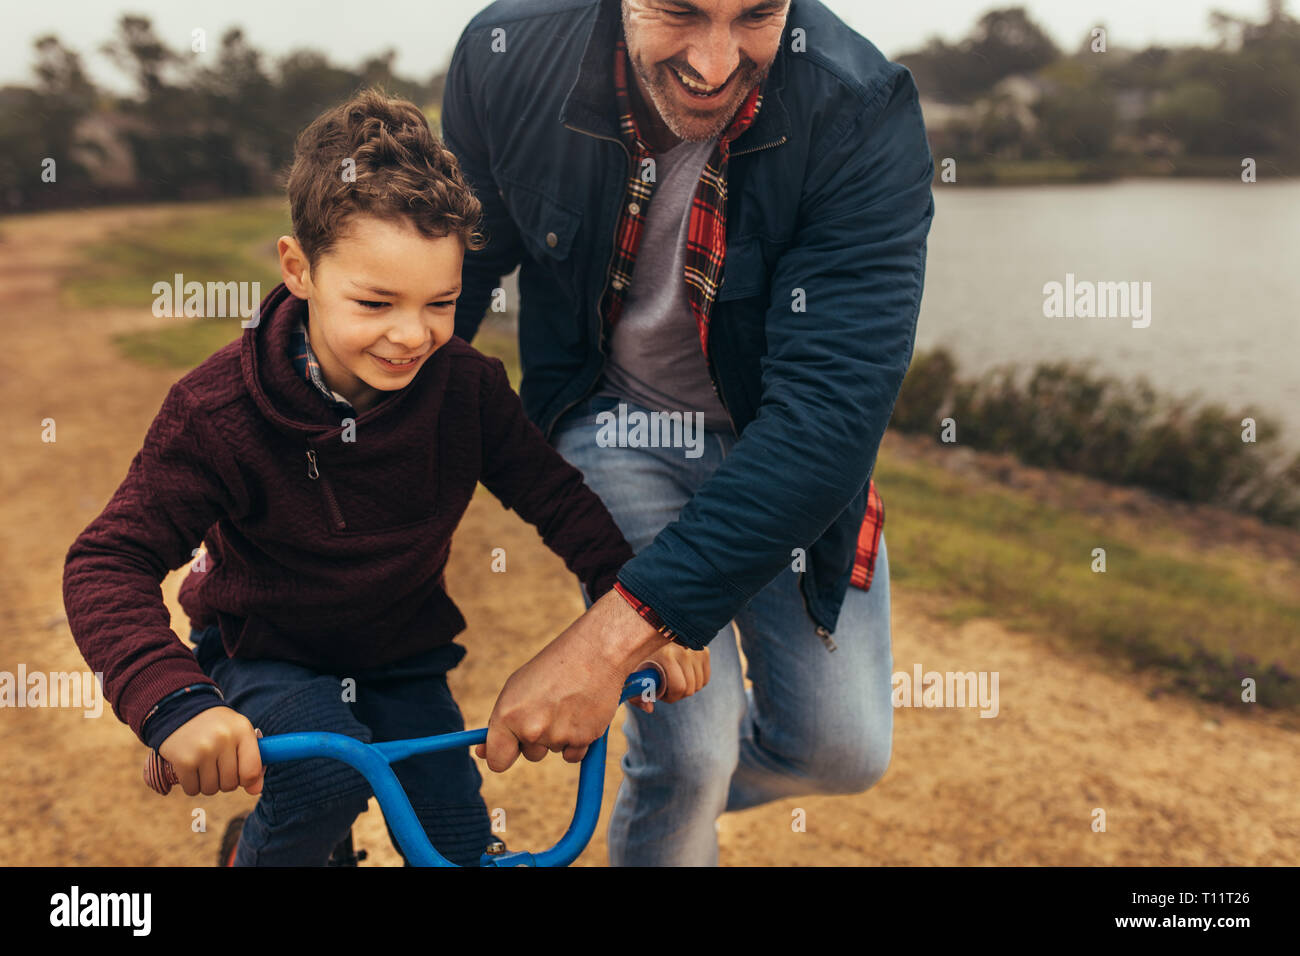 Smiling kid learning to ride a bicycle near a lake. Man walking along the bicycle holding it while the kid learns to ride it. Stock Photo